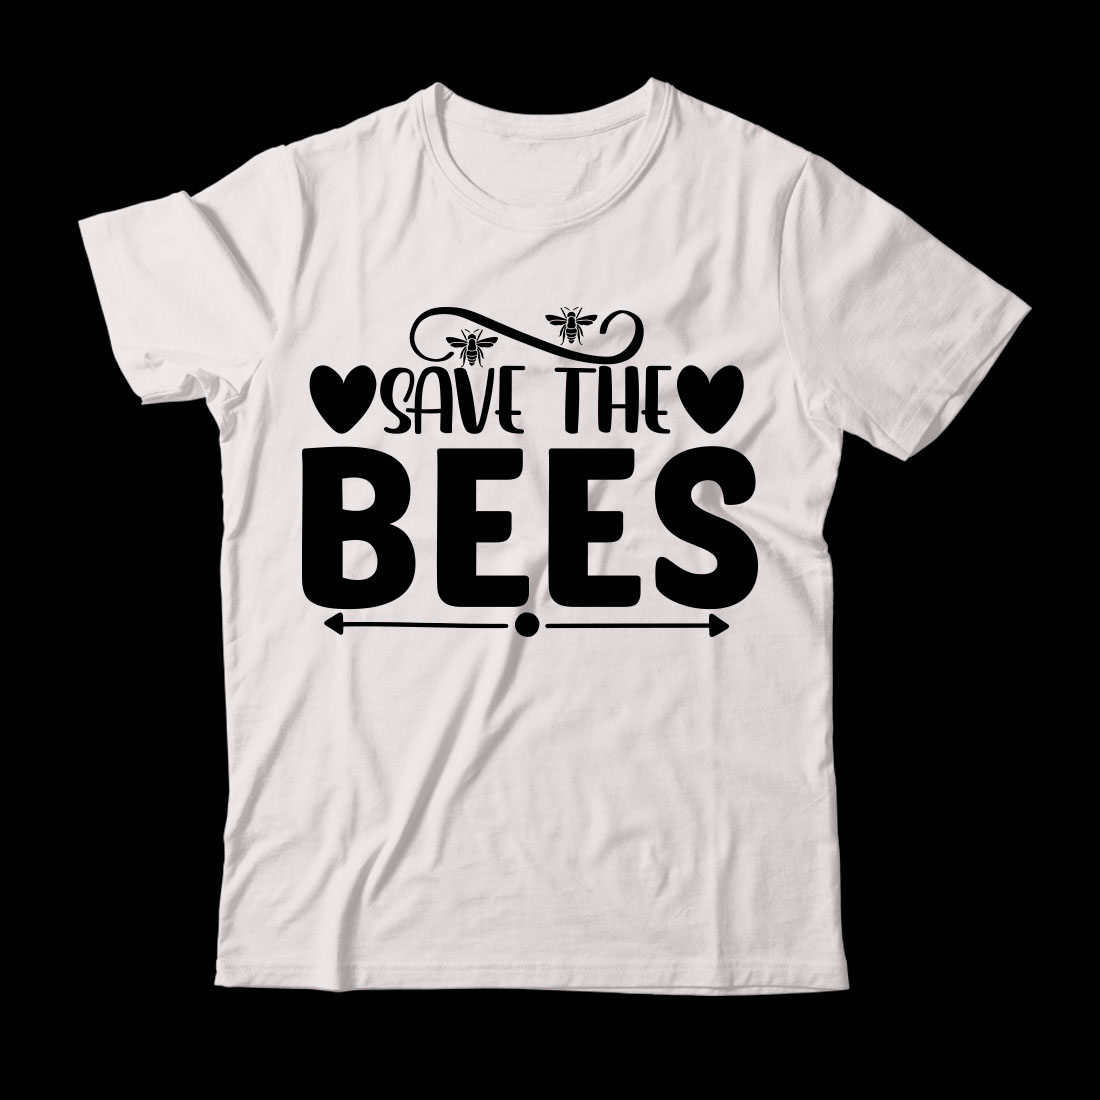 White t - shirt that says save the bees.